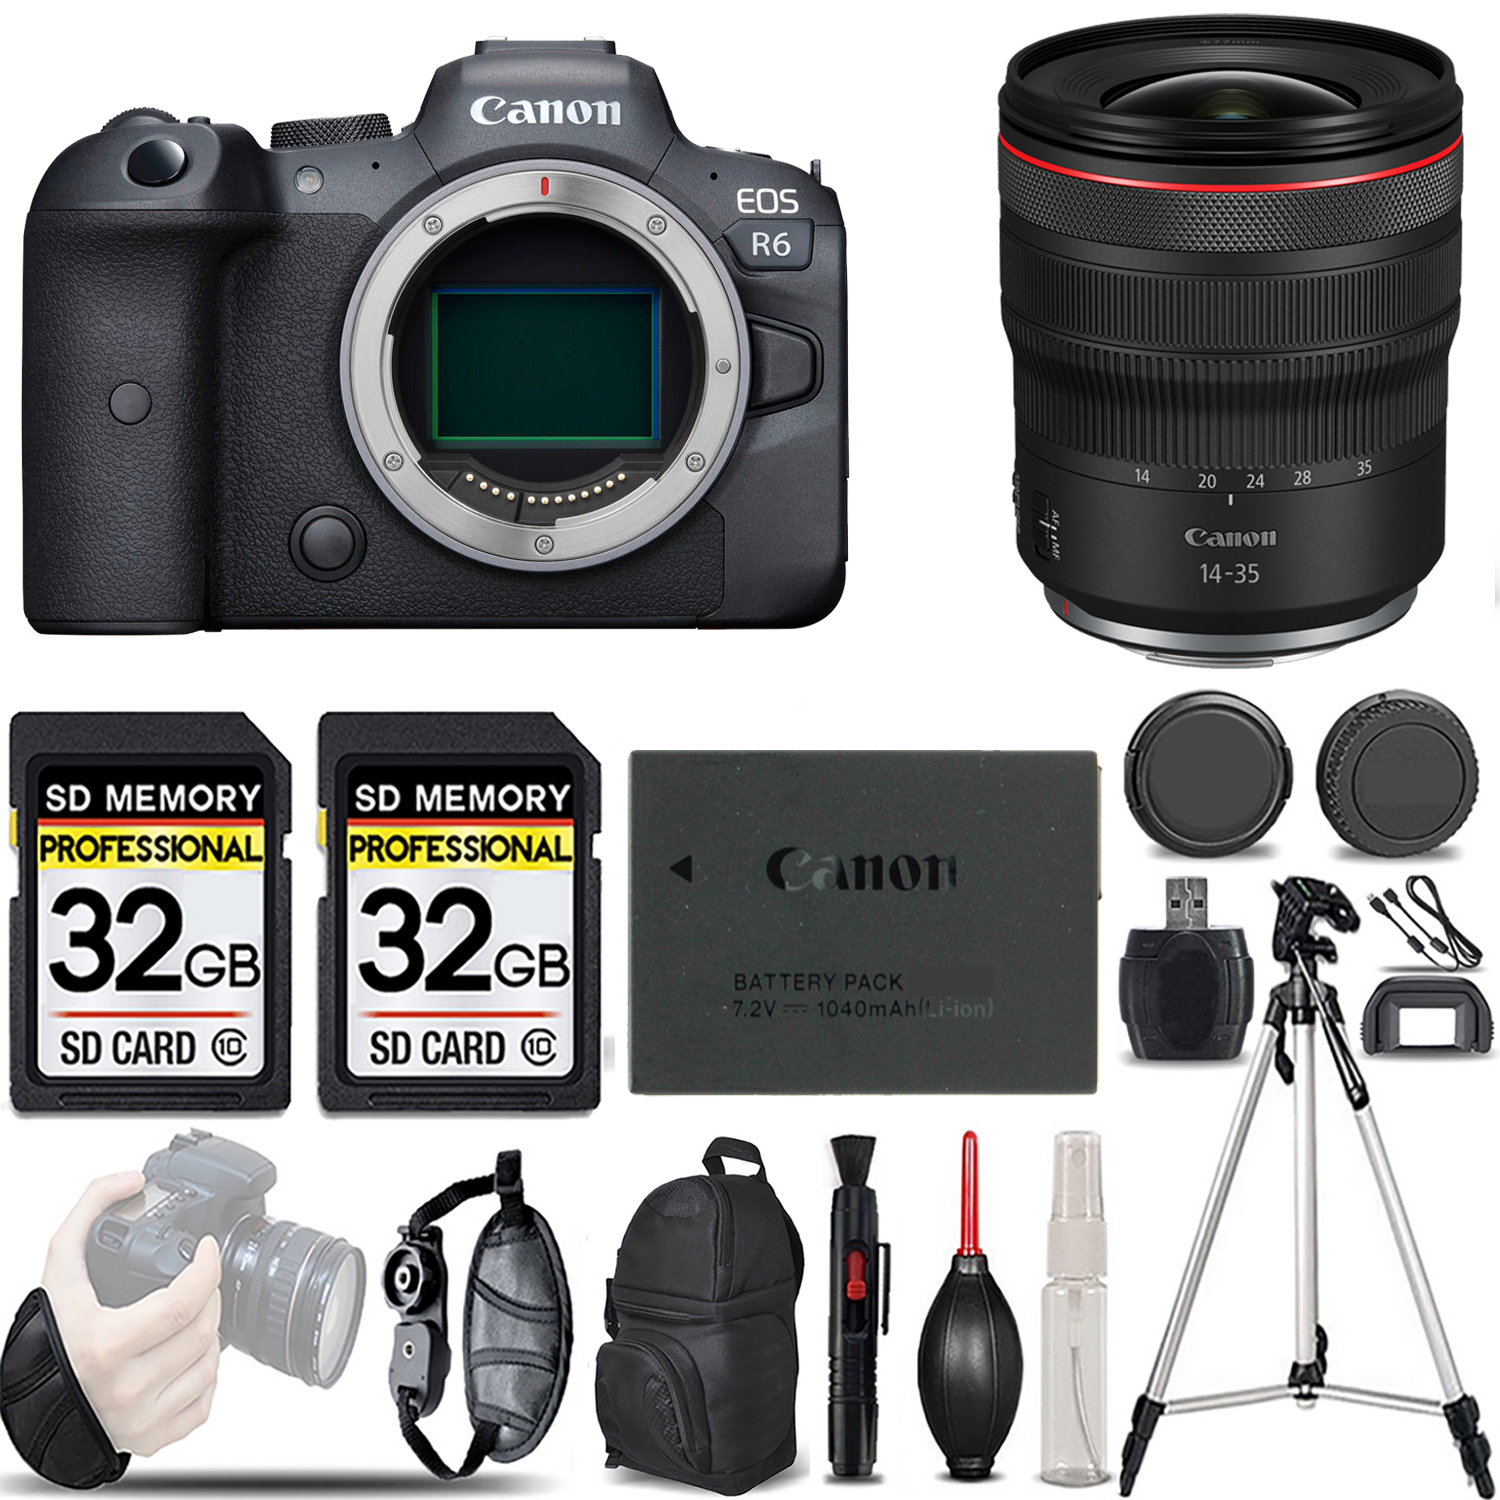 EOS R6 Mirrorless Camera + 14- 35mm f/4 L IS USM Lens - LOADED KIT *FREE SHIPPING*